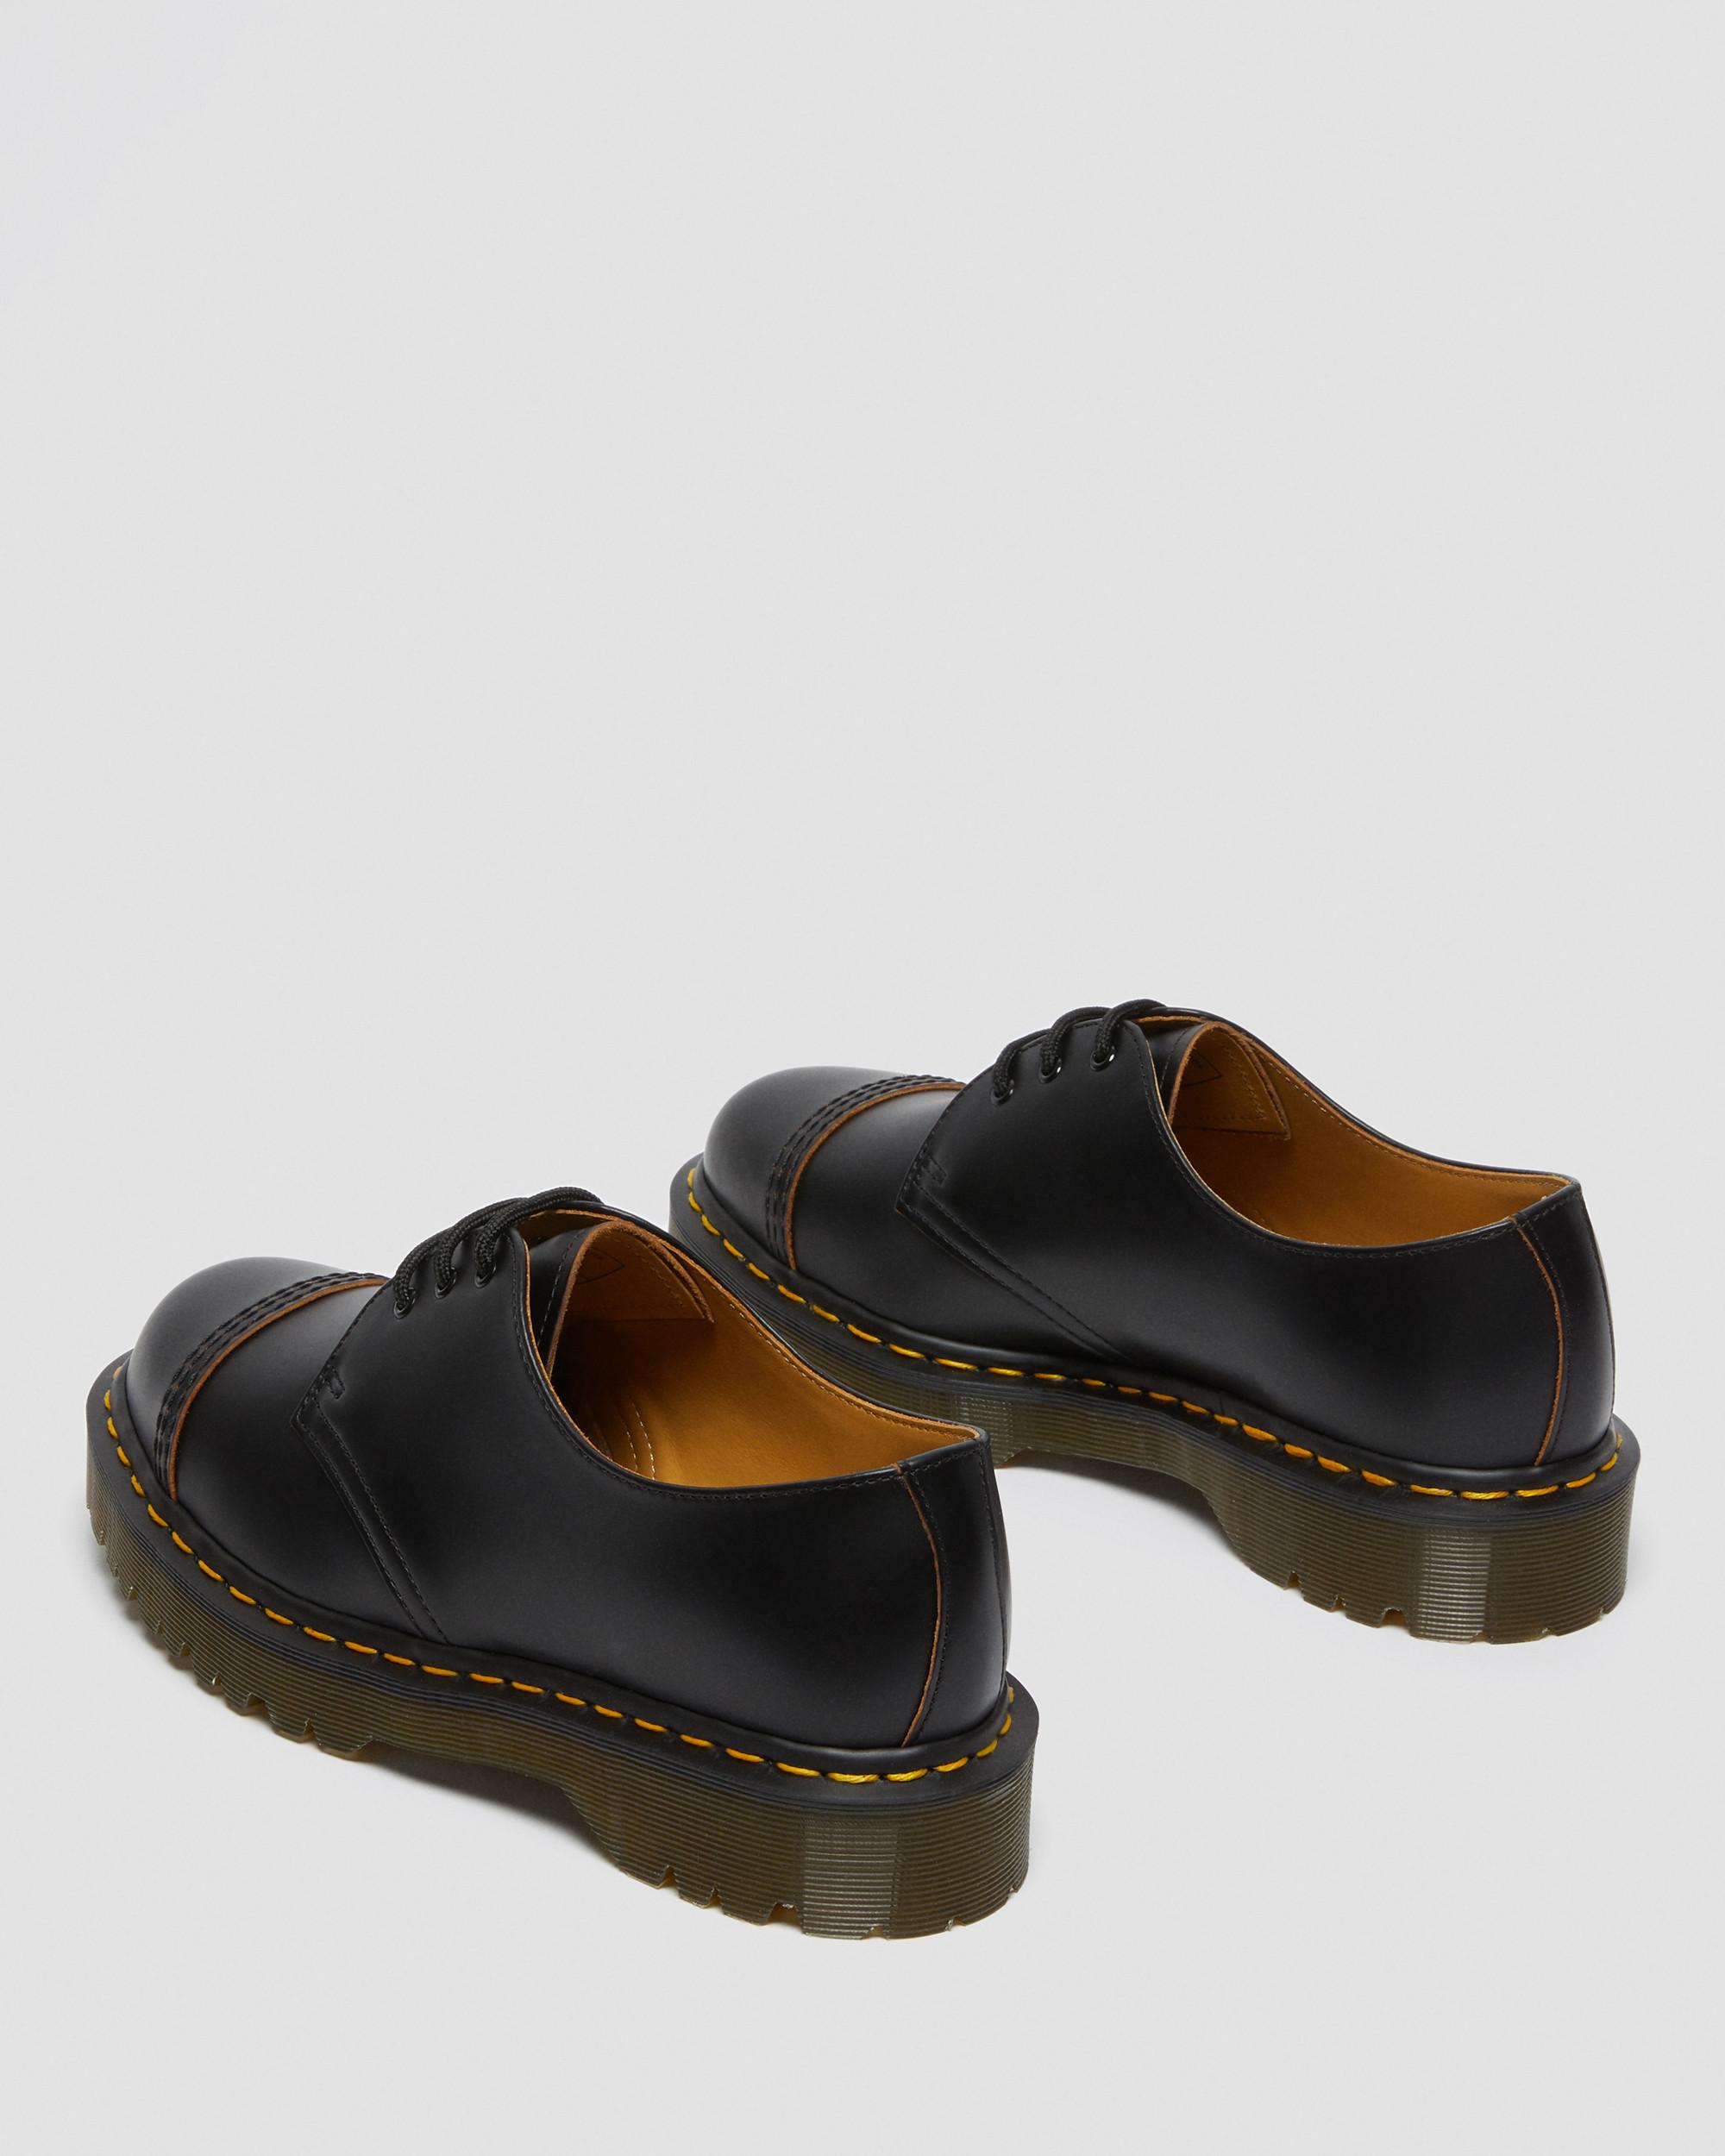 1461 Bex Made in England Toe Cap Oxford Shoes | Dr. Martens